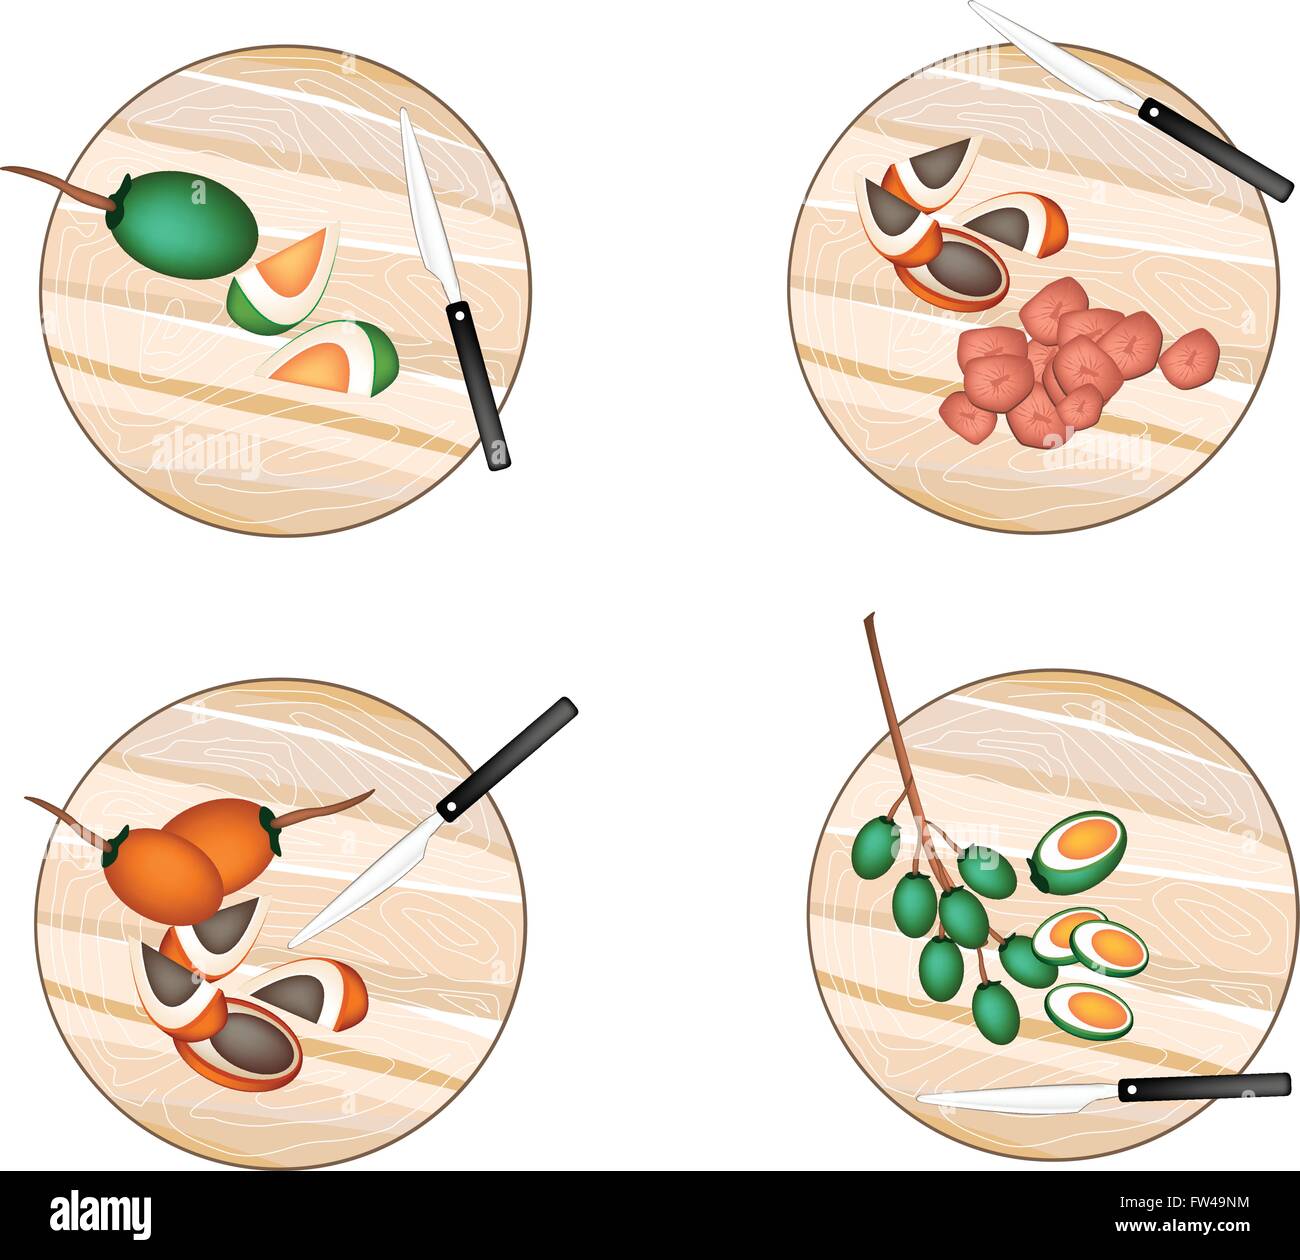 Vegetable and Herb, Illustration Whole and Half Betel Palm Nut or Areca Nut on Wooden Cutting Boards. Stock Vector